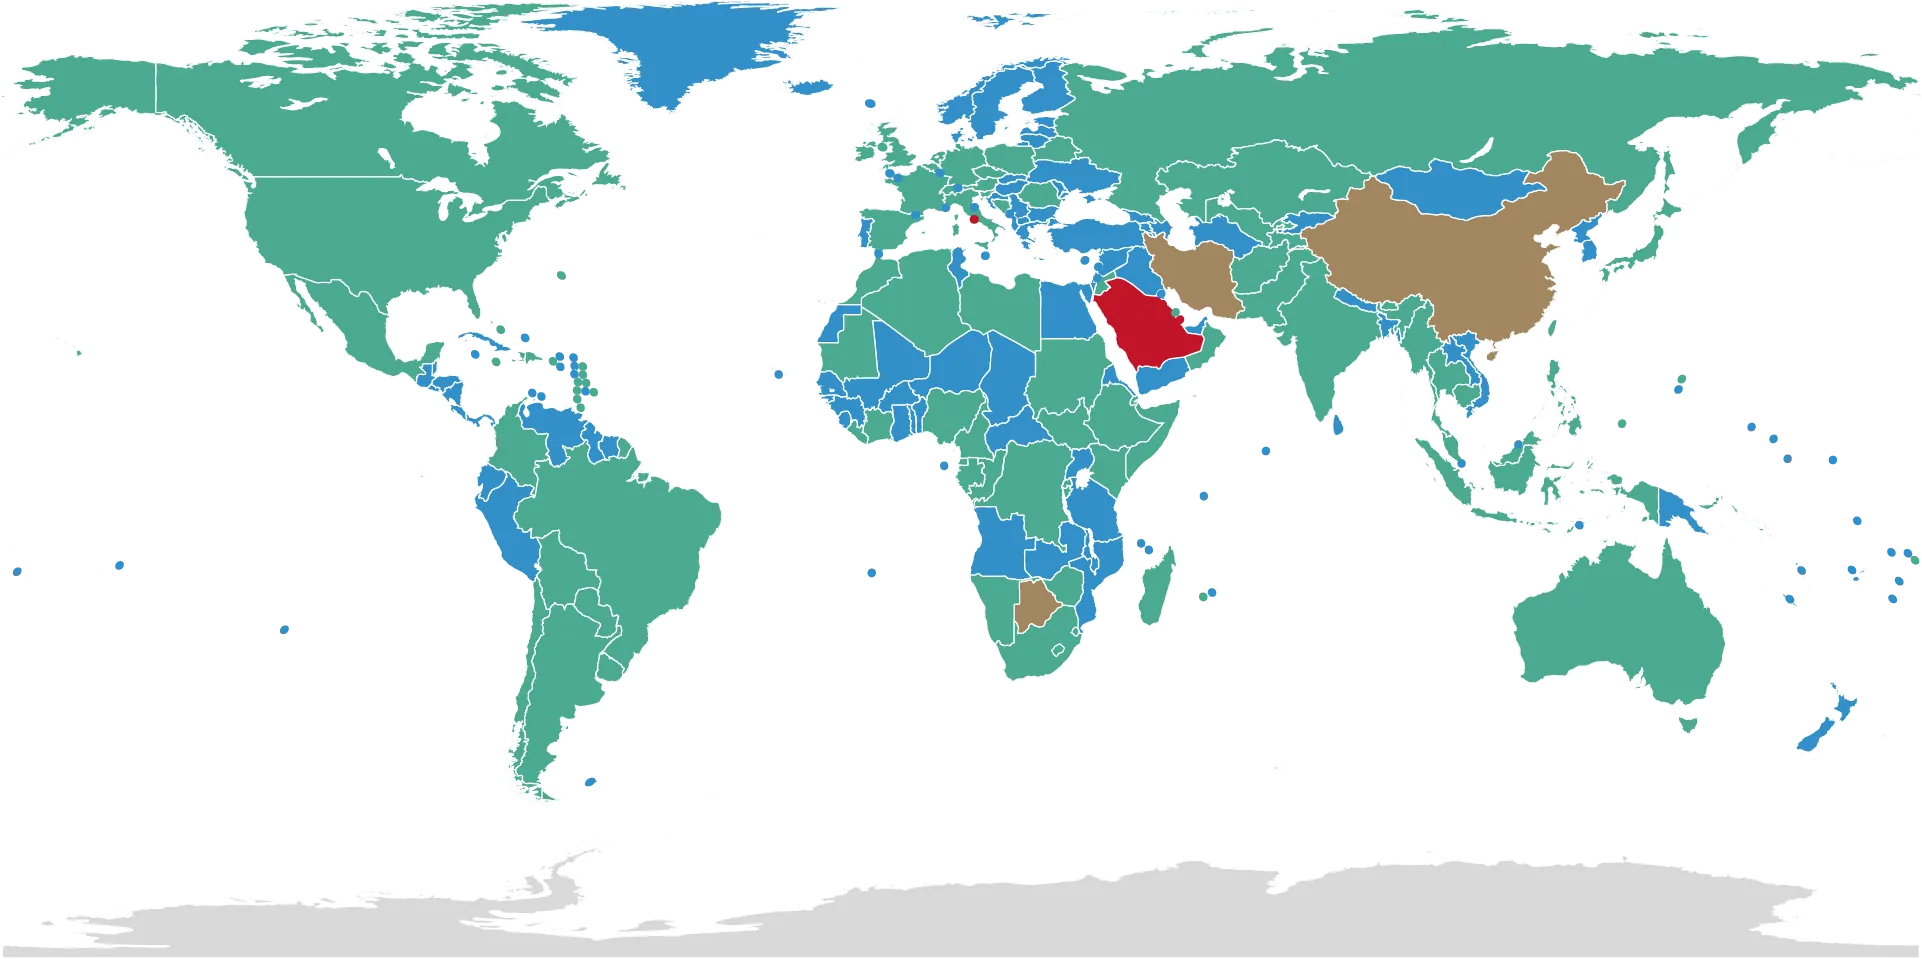 A world map codes countries according to whether they have bicameral or unicameral legislatures, some variant, or no legislature at all.